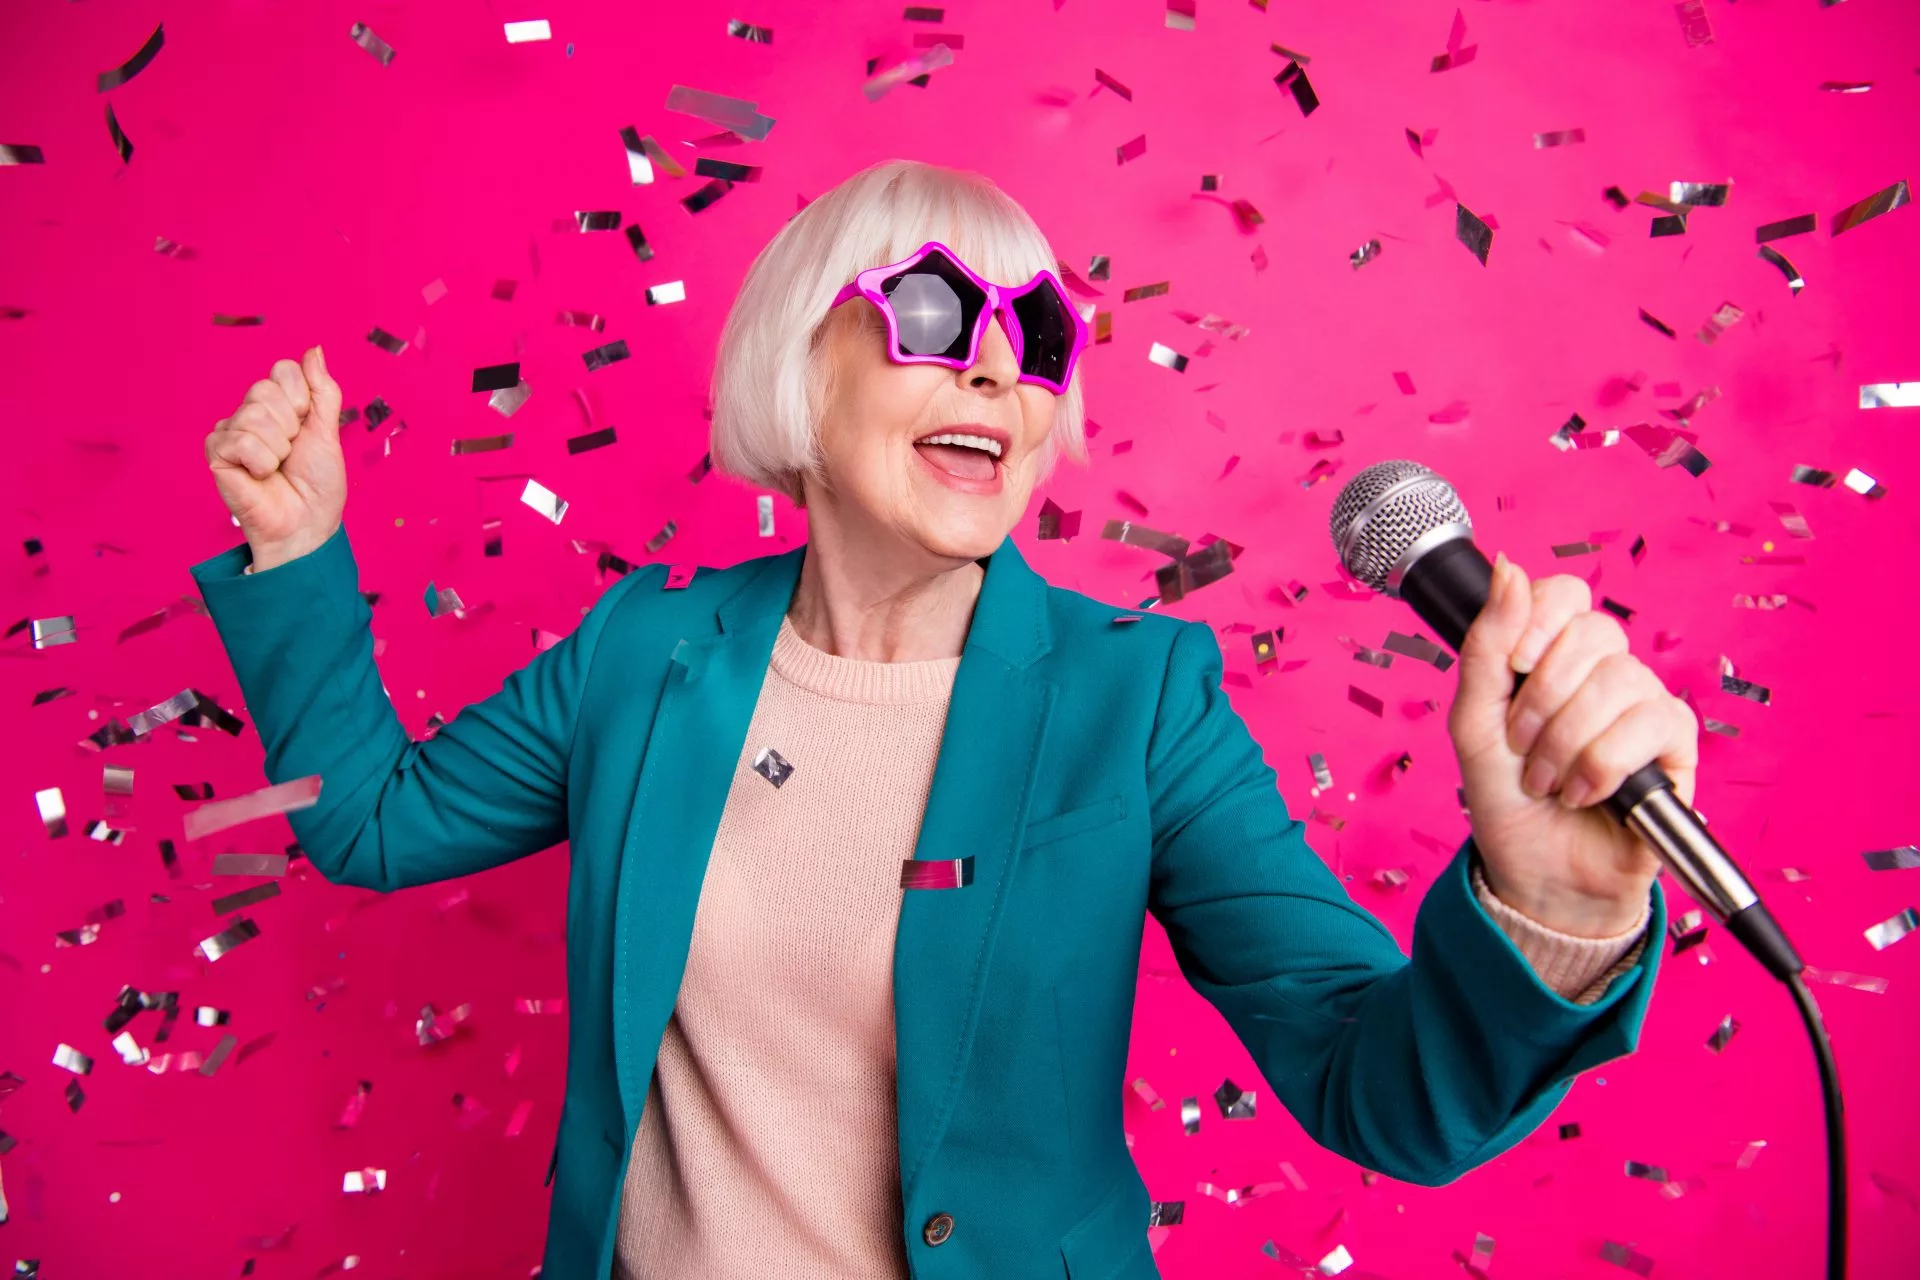 Senior lady singing in to a microphone wearing start shaped glasses